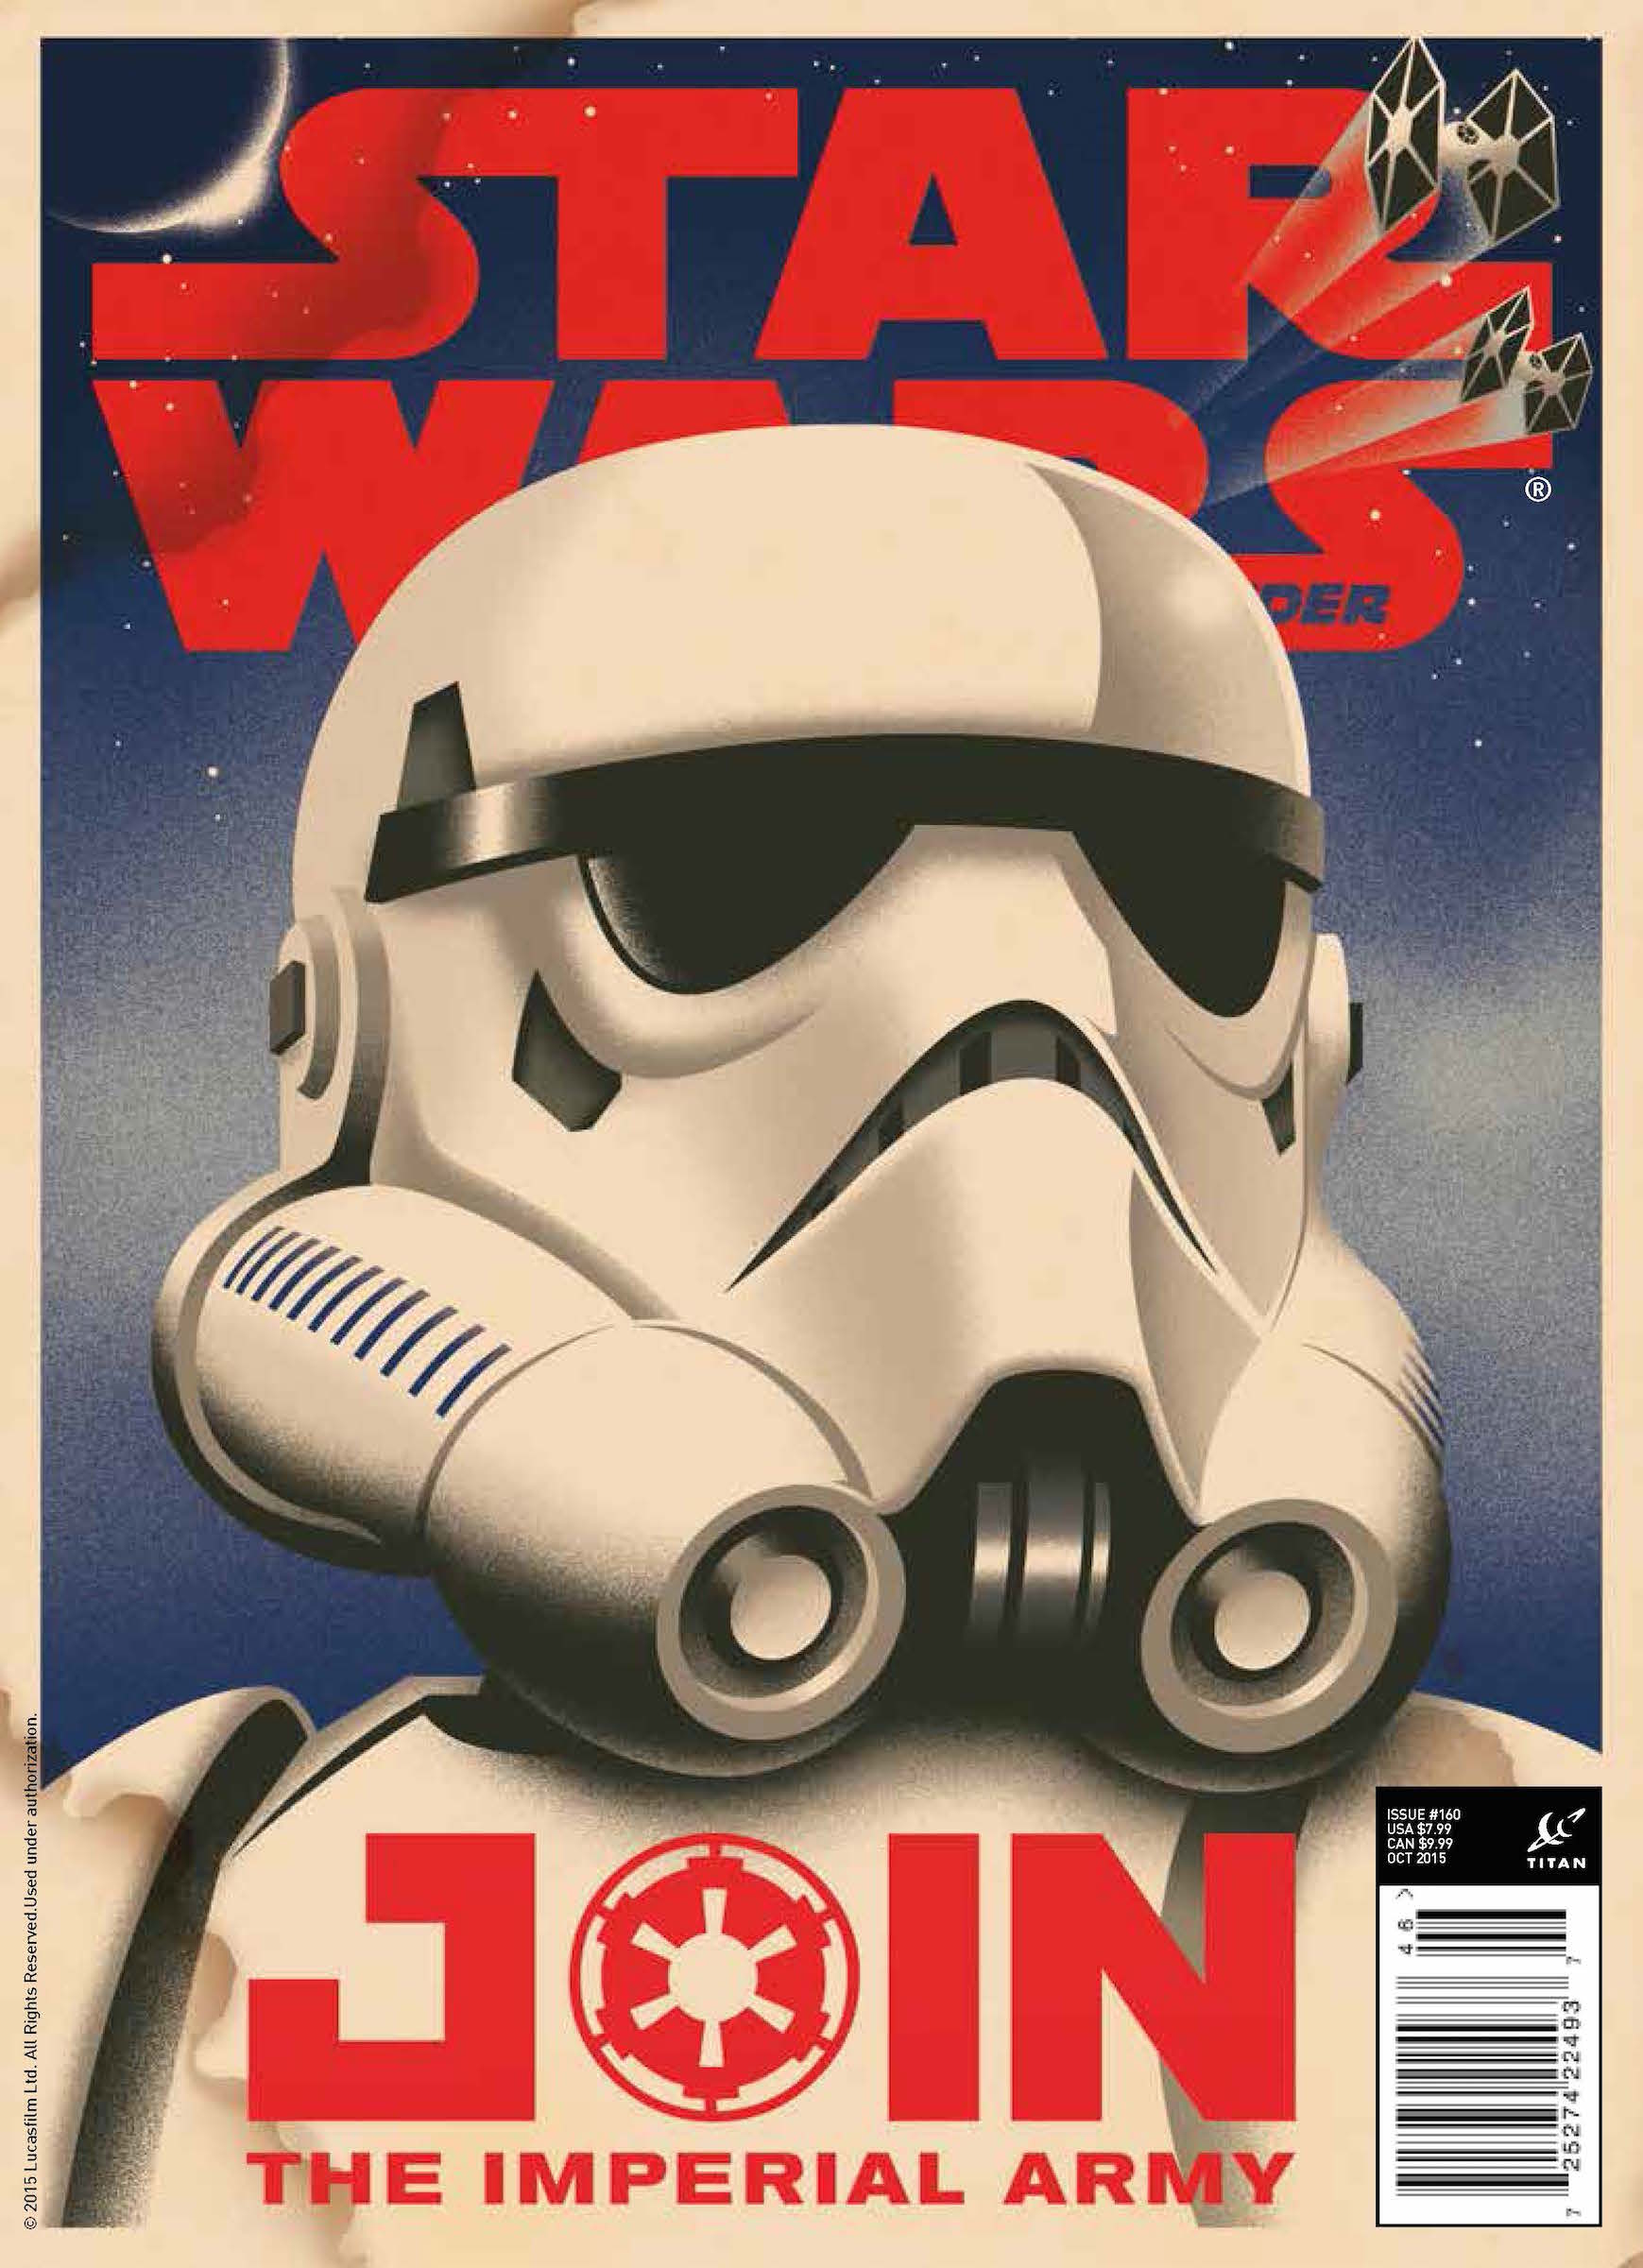 Star Wars Insider #160 (Comic Store Cover)